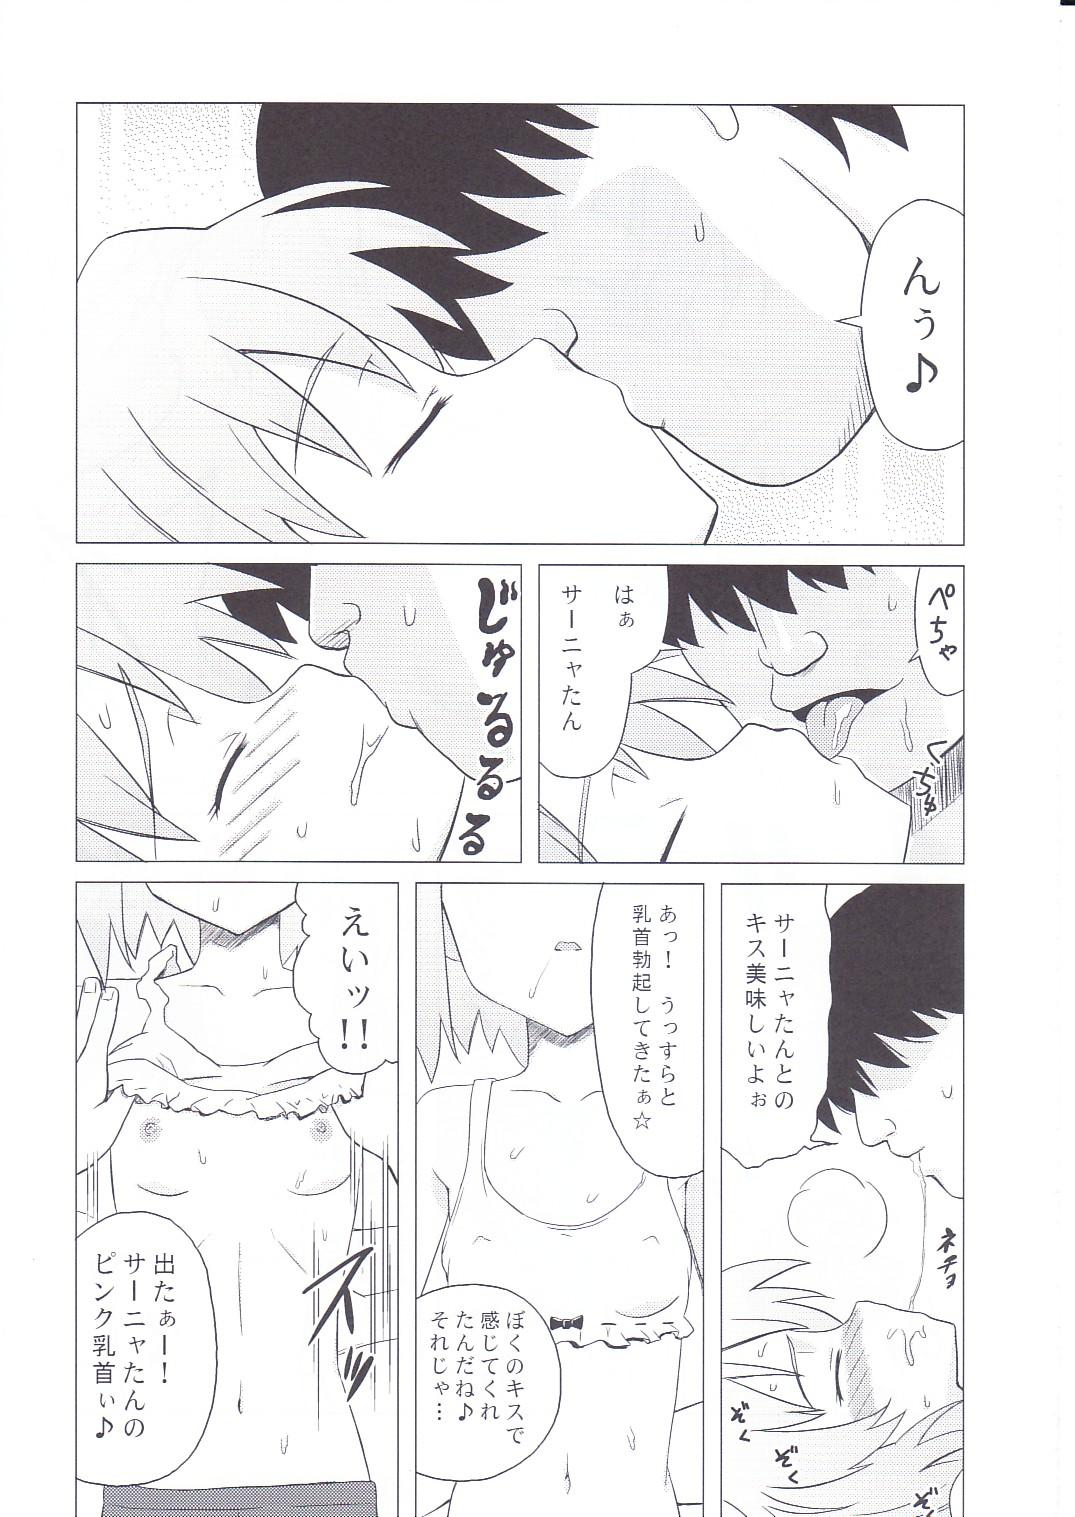 Phat Sleeping witches - Strike witches Dress - Page 6